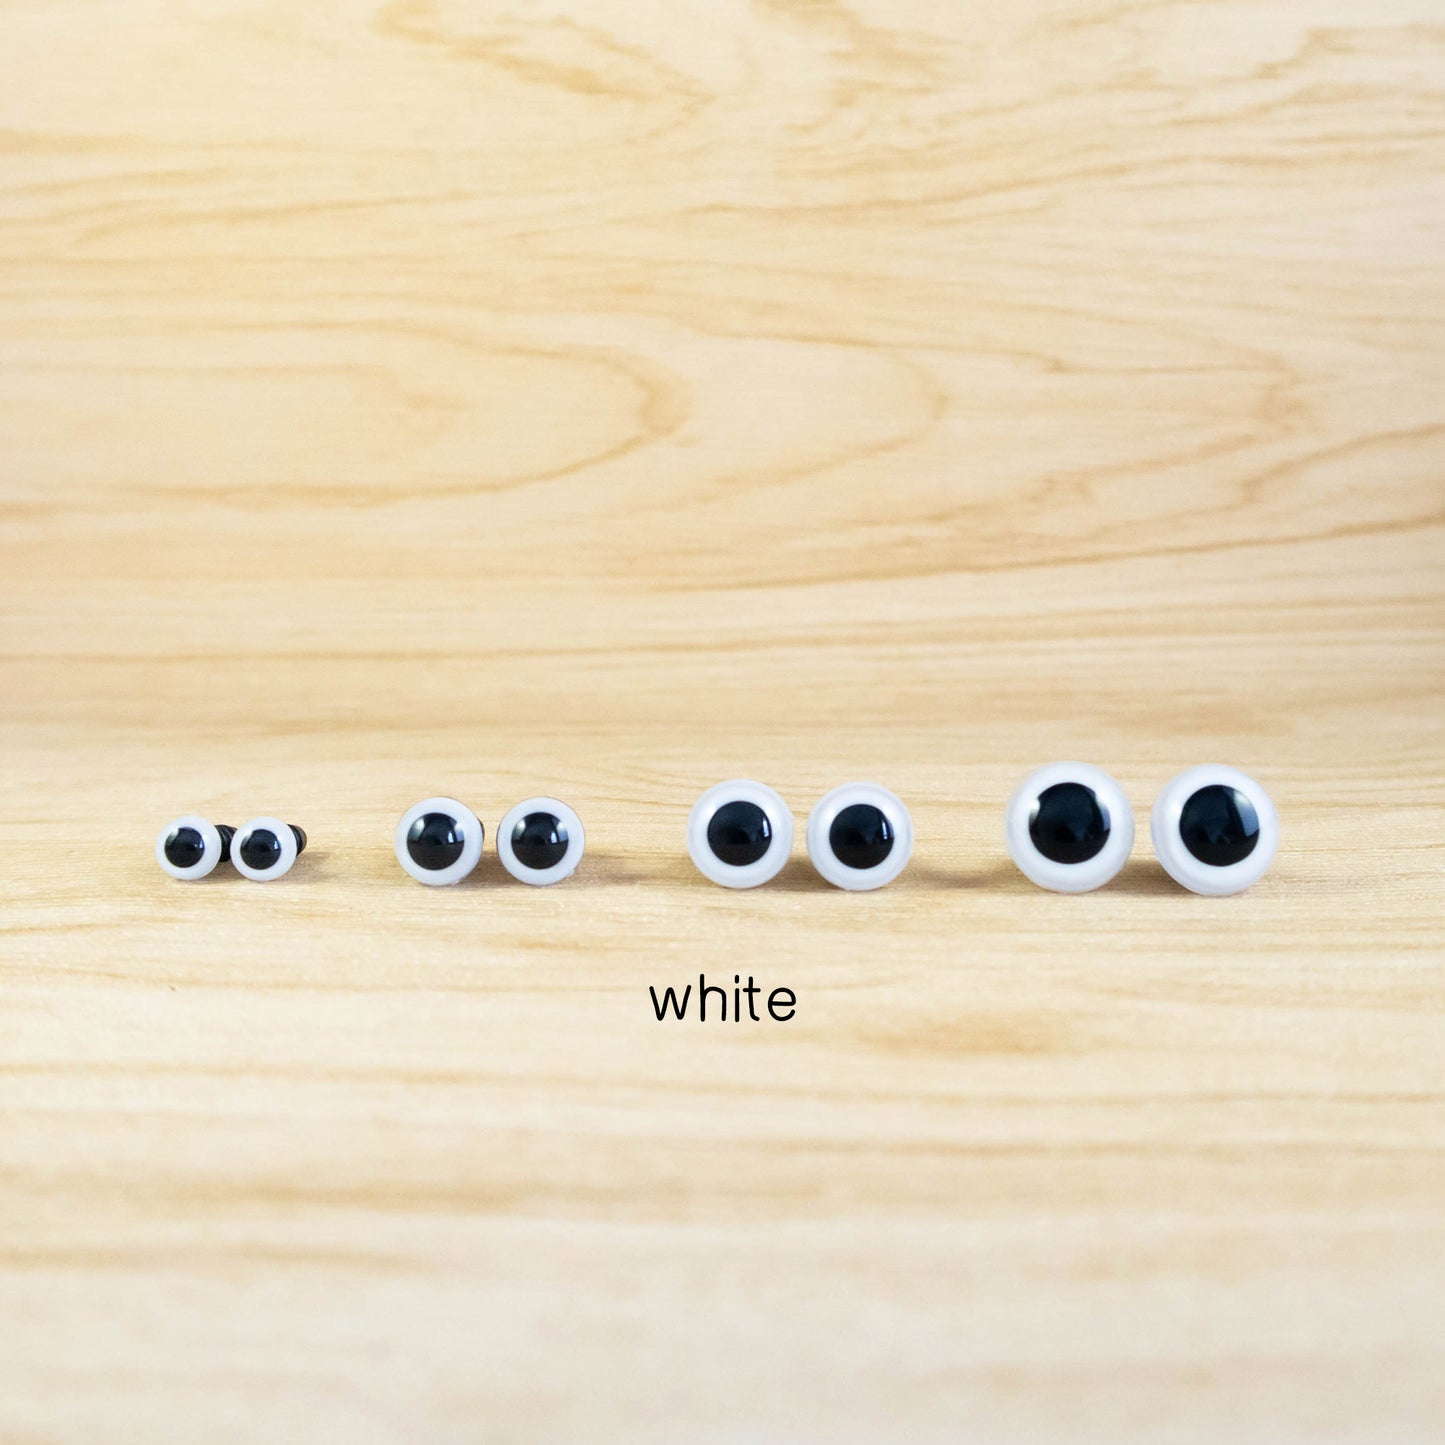 White safety eyes for crochet toys and dolls